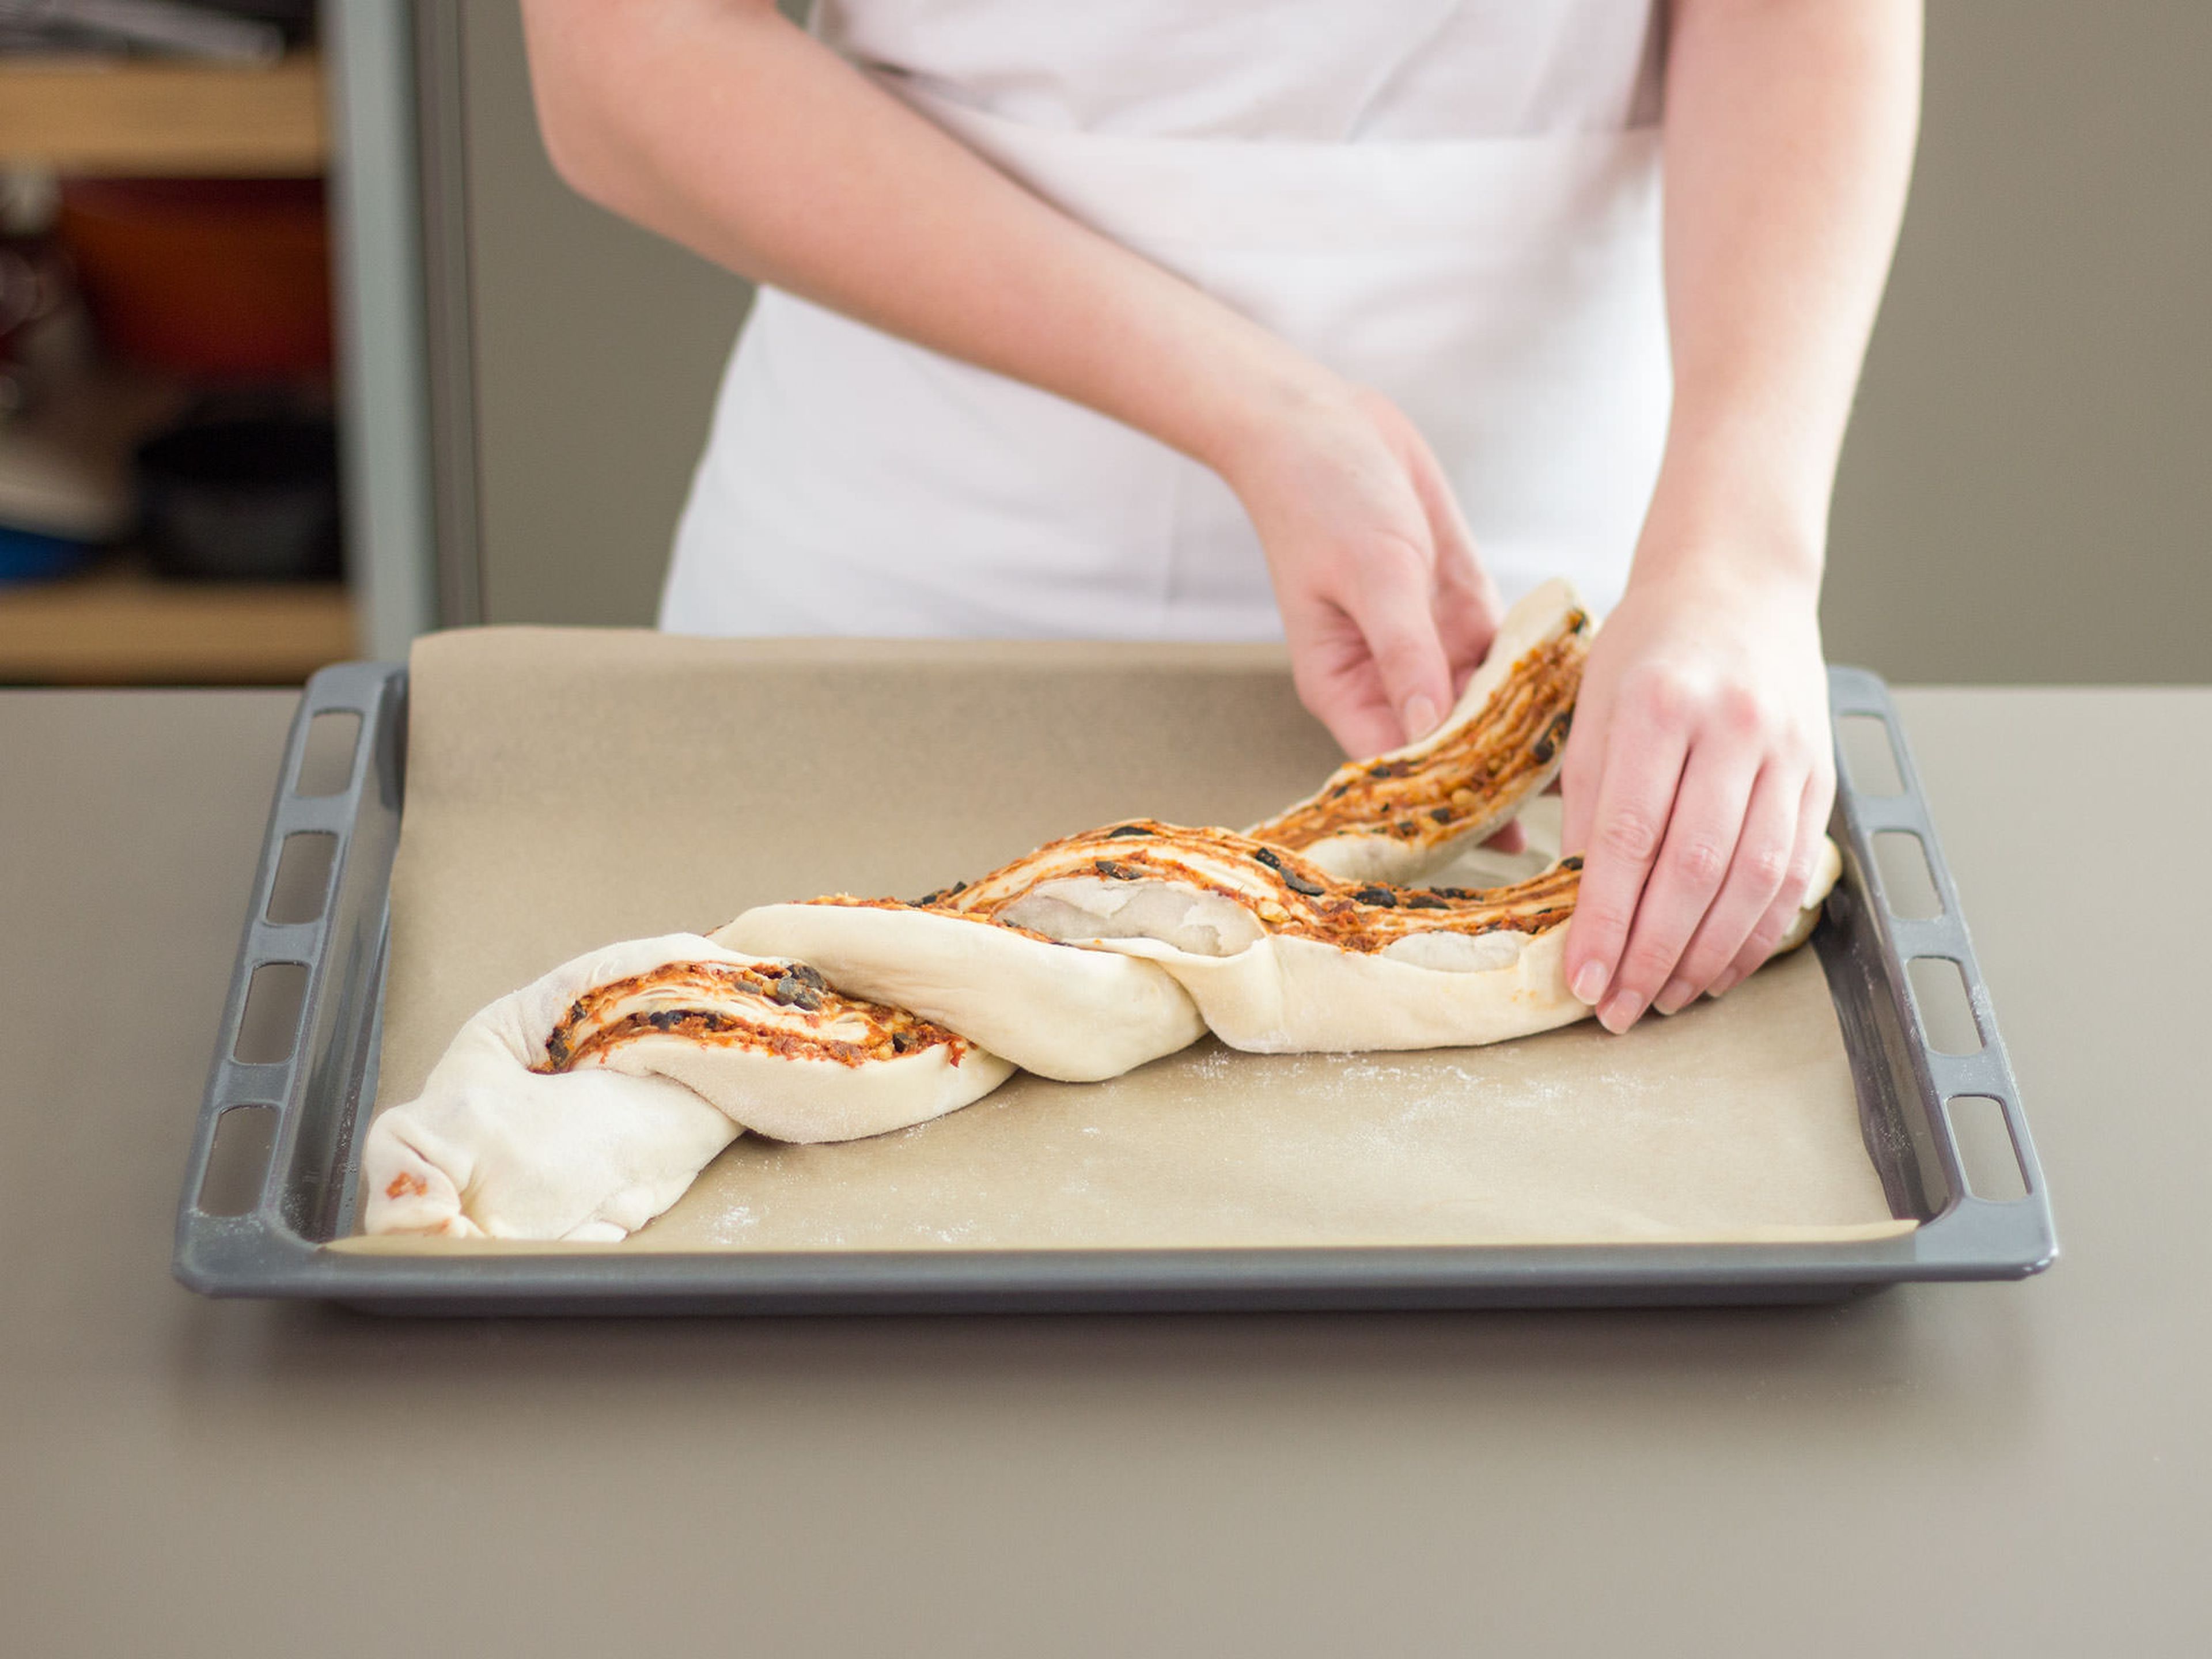 Transfer dough to a parchment-lined baking sheet. Cut dough log in half lengthwise and then braid into a loaf. Transfer to preheated oven and bake at 180°C/350°F for approx. 35 – 45 min. Remove from oven and allow to cool or enjoy warm right away!